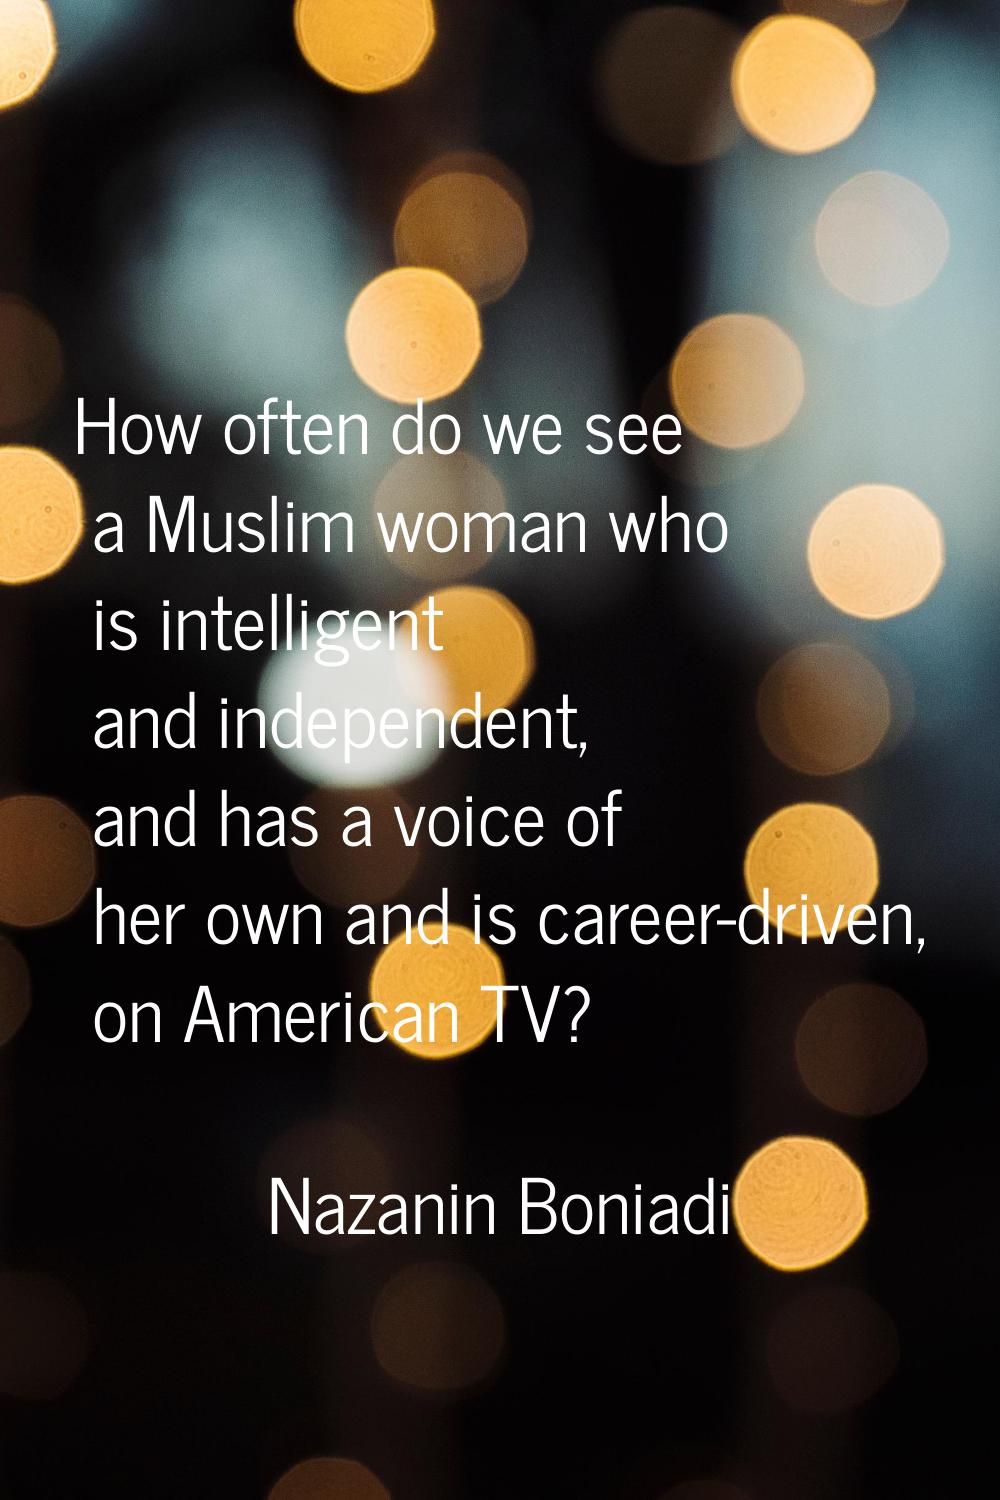 How often do we see a Muslim woman who is intelligent and independent, and has a voice of her own a